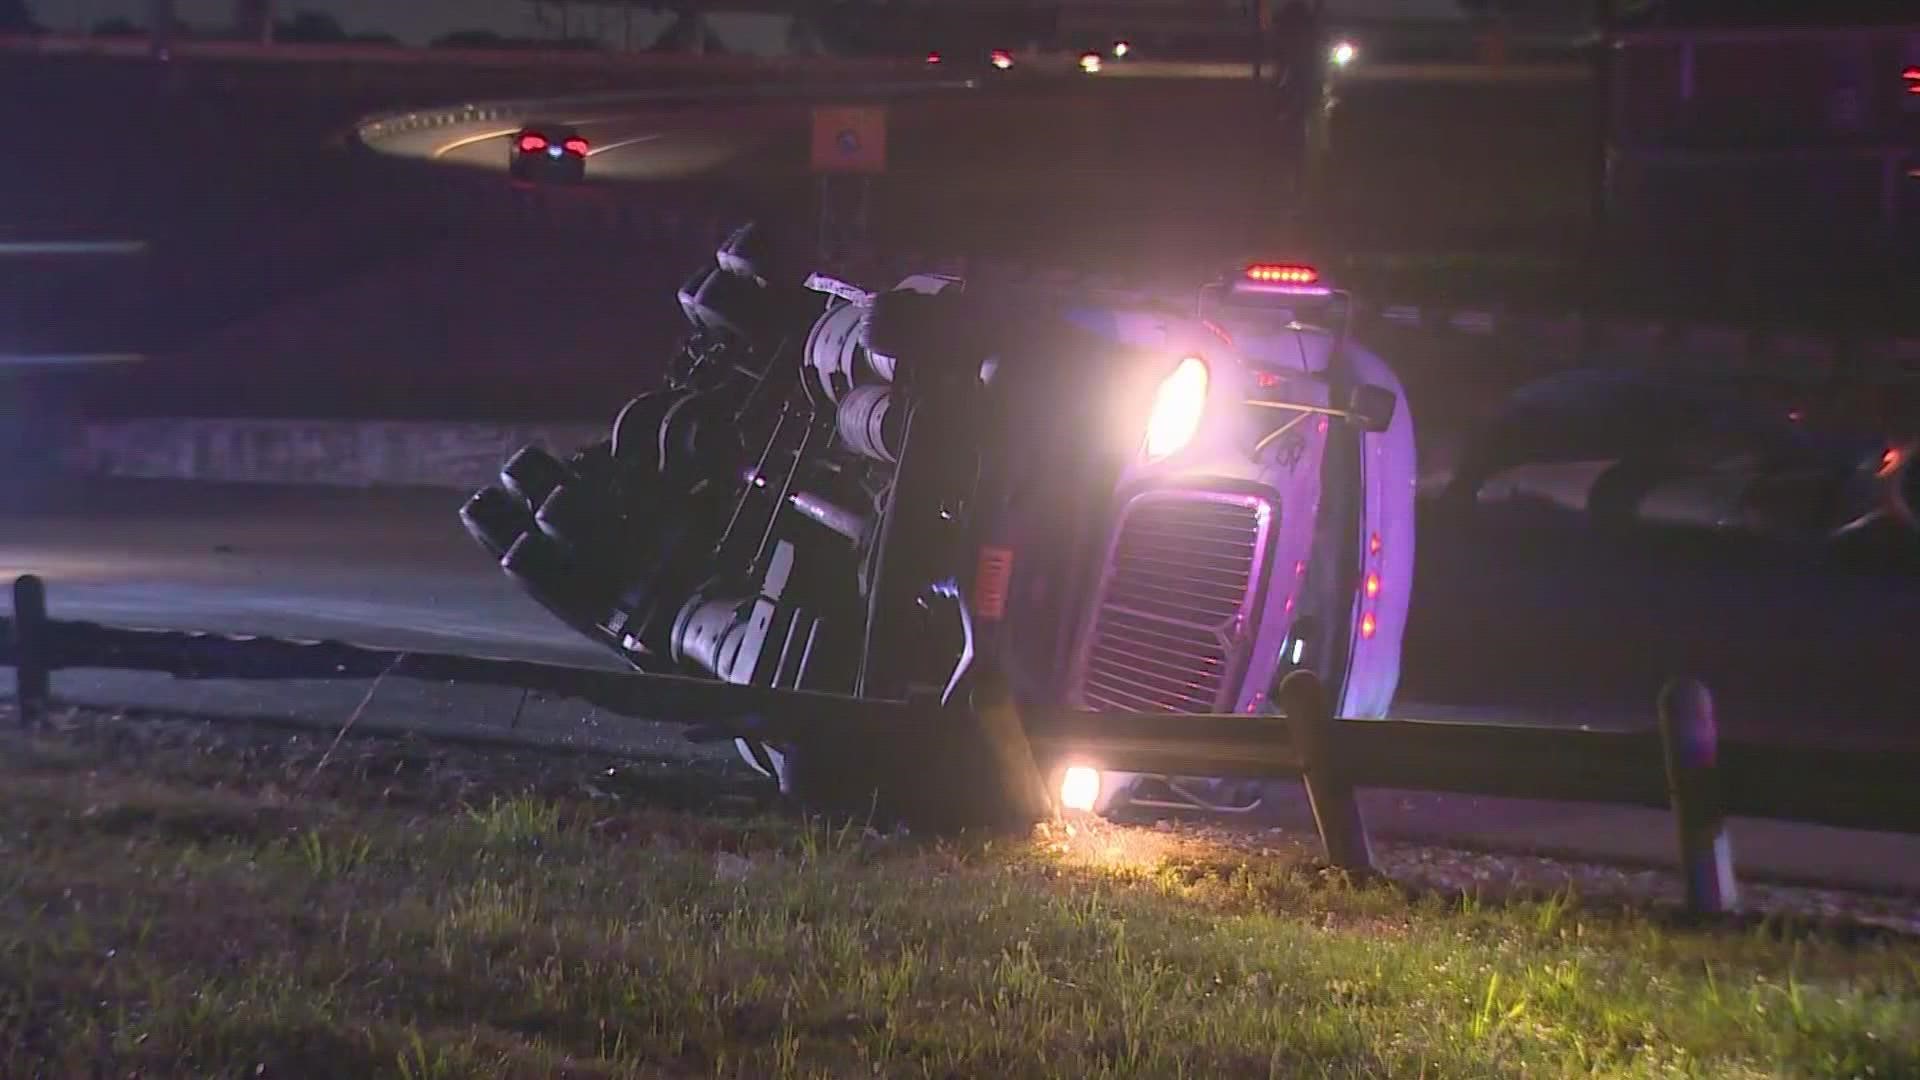 Houston police say the 18-wheeler was carrying 48,000 pounds of sheet metal. Drivers going downtown were diverted off the freeway for hours early Wednesday morning.